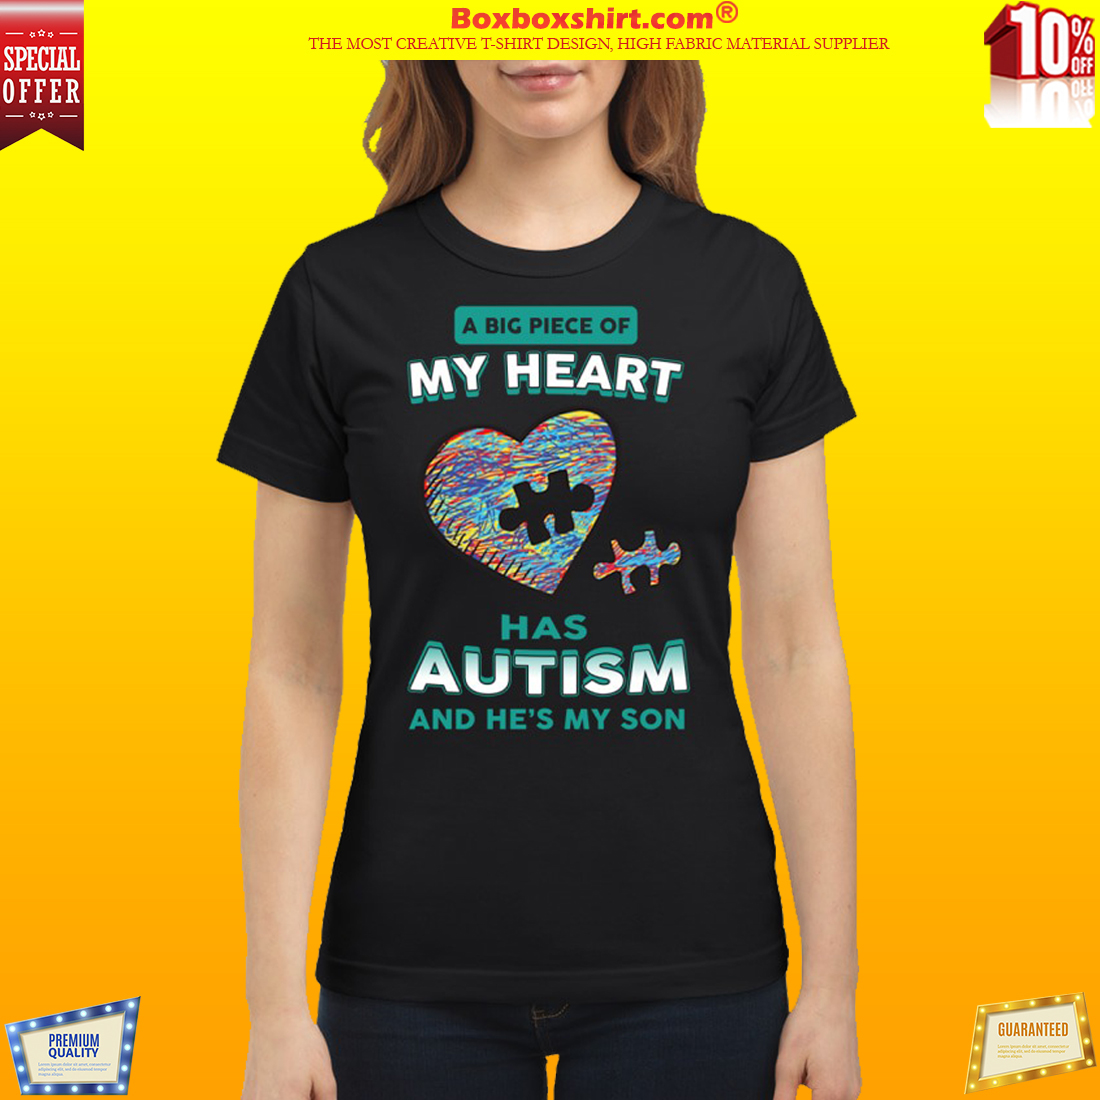 A big piece of my heart has autism he's my son shirt